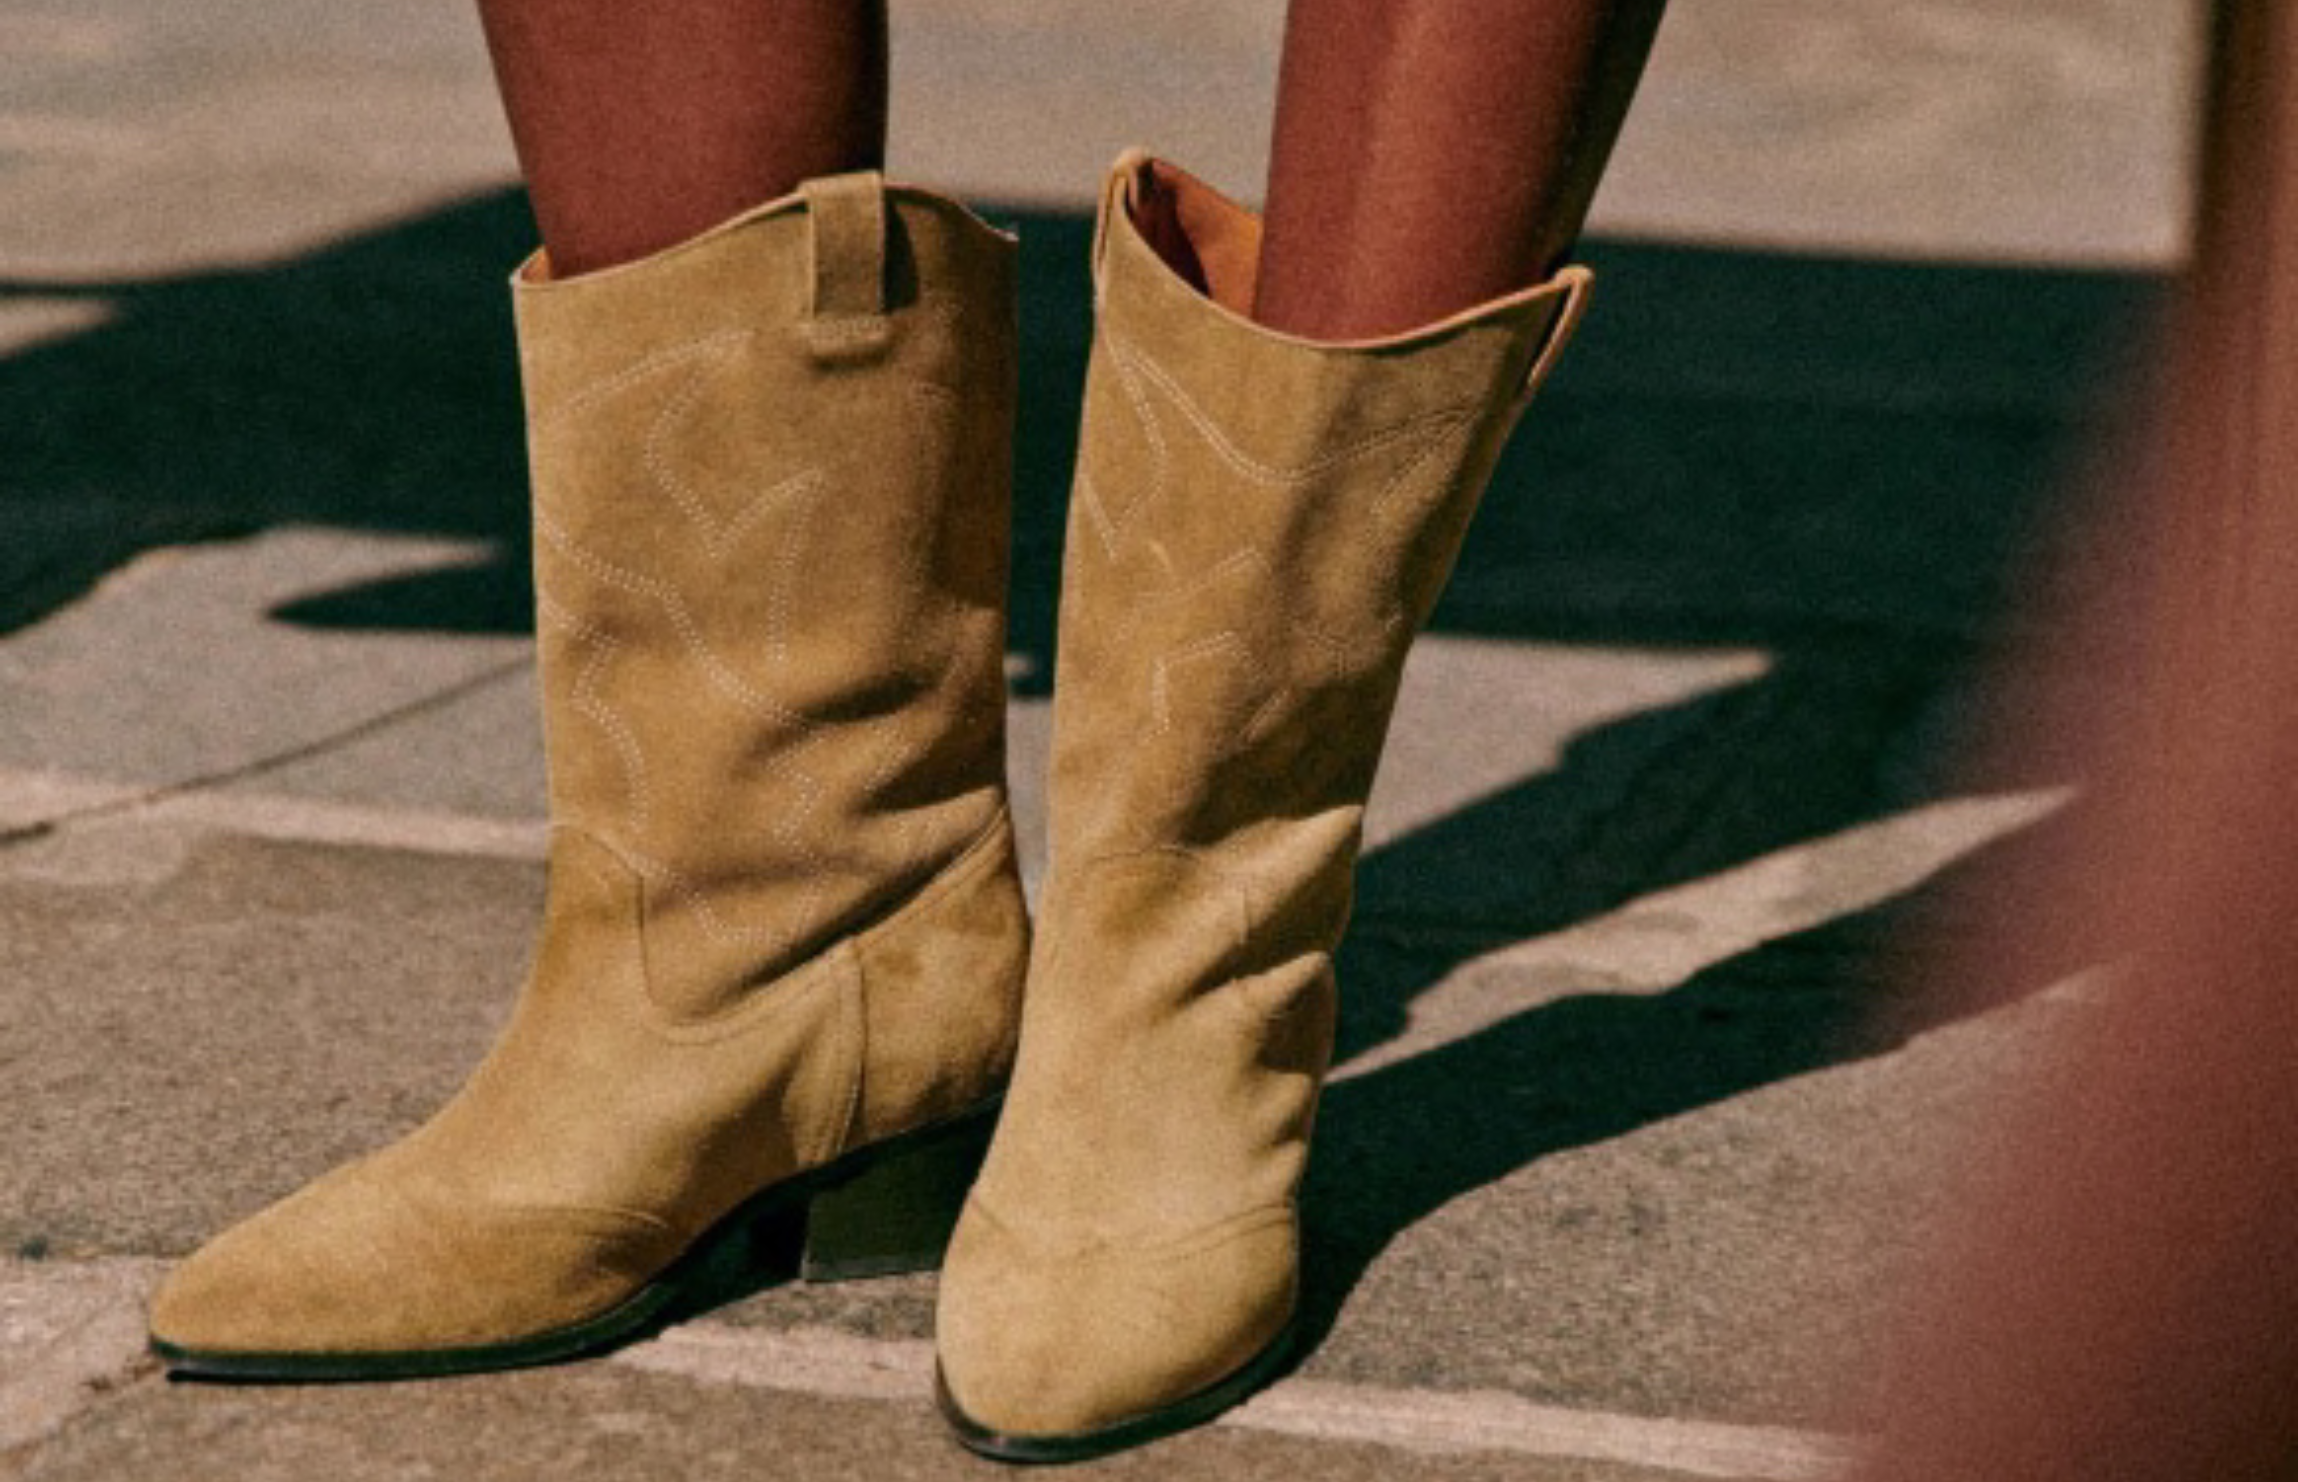 Swap Your Sandals For New Season Boots